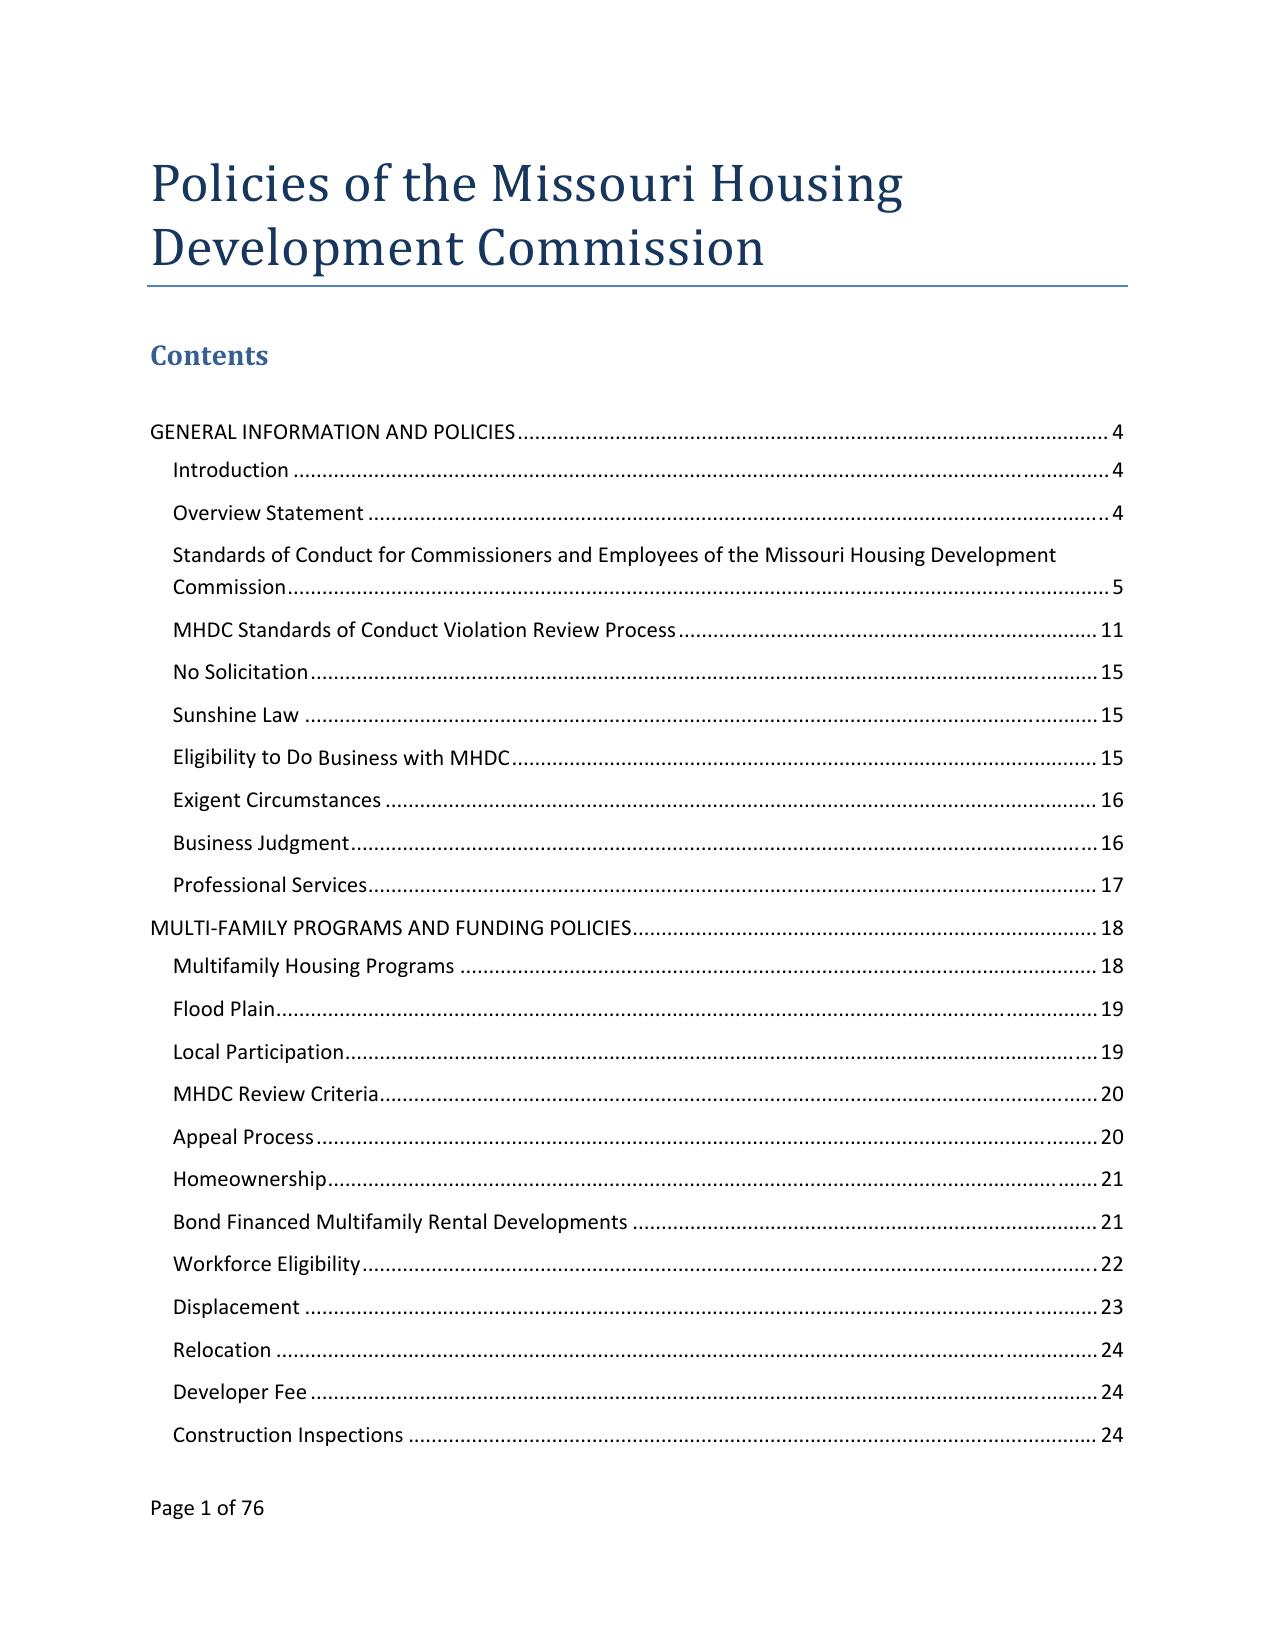 Policies of the Missouri Housing Development Commission 2016